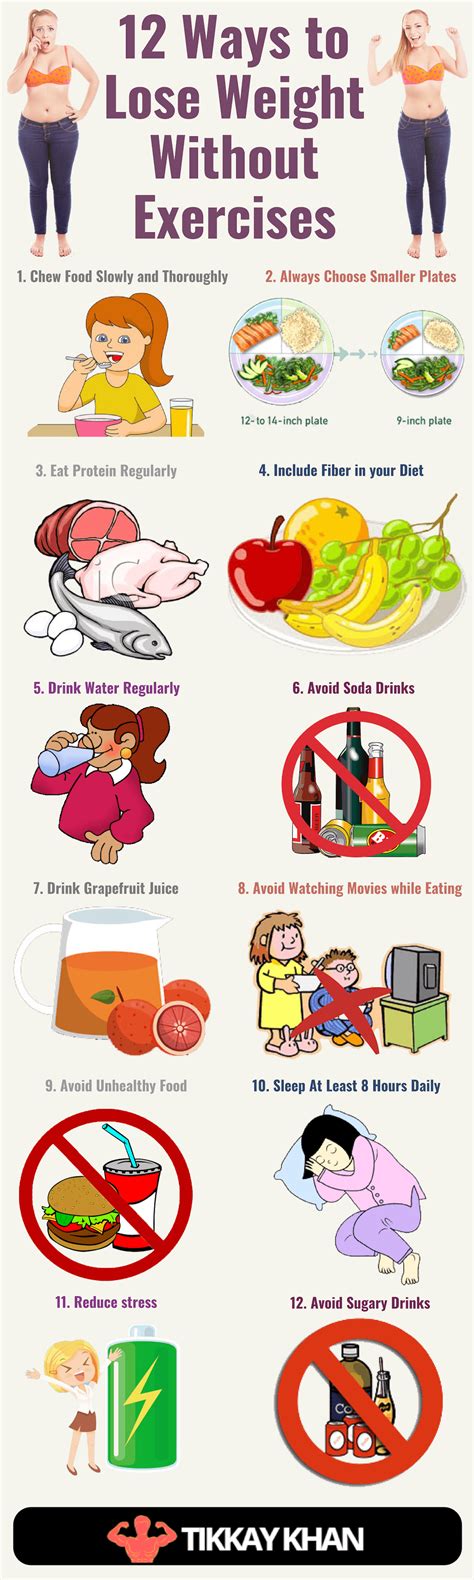 12 Ways To Lose Weight Without Exercises Tikkay Khan